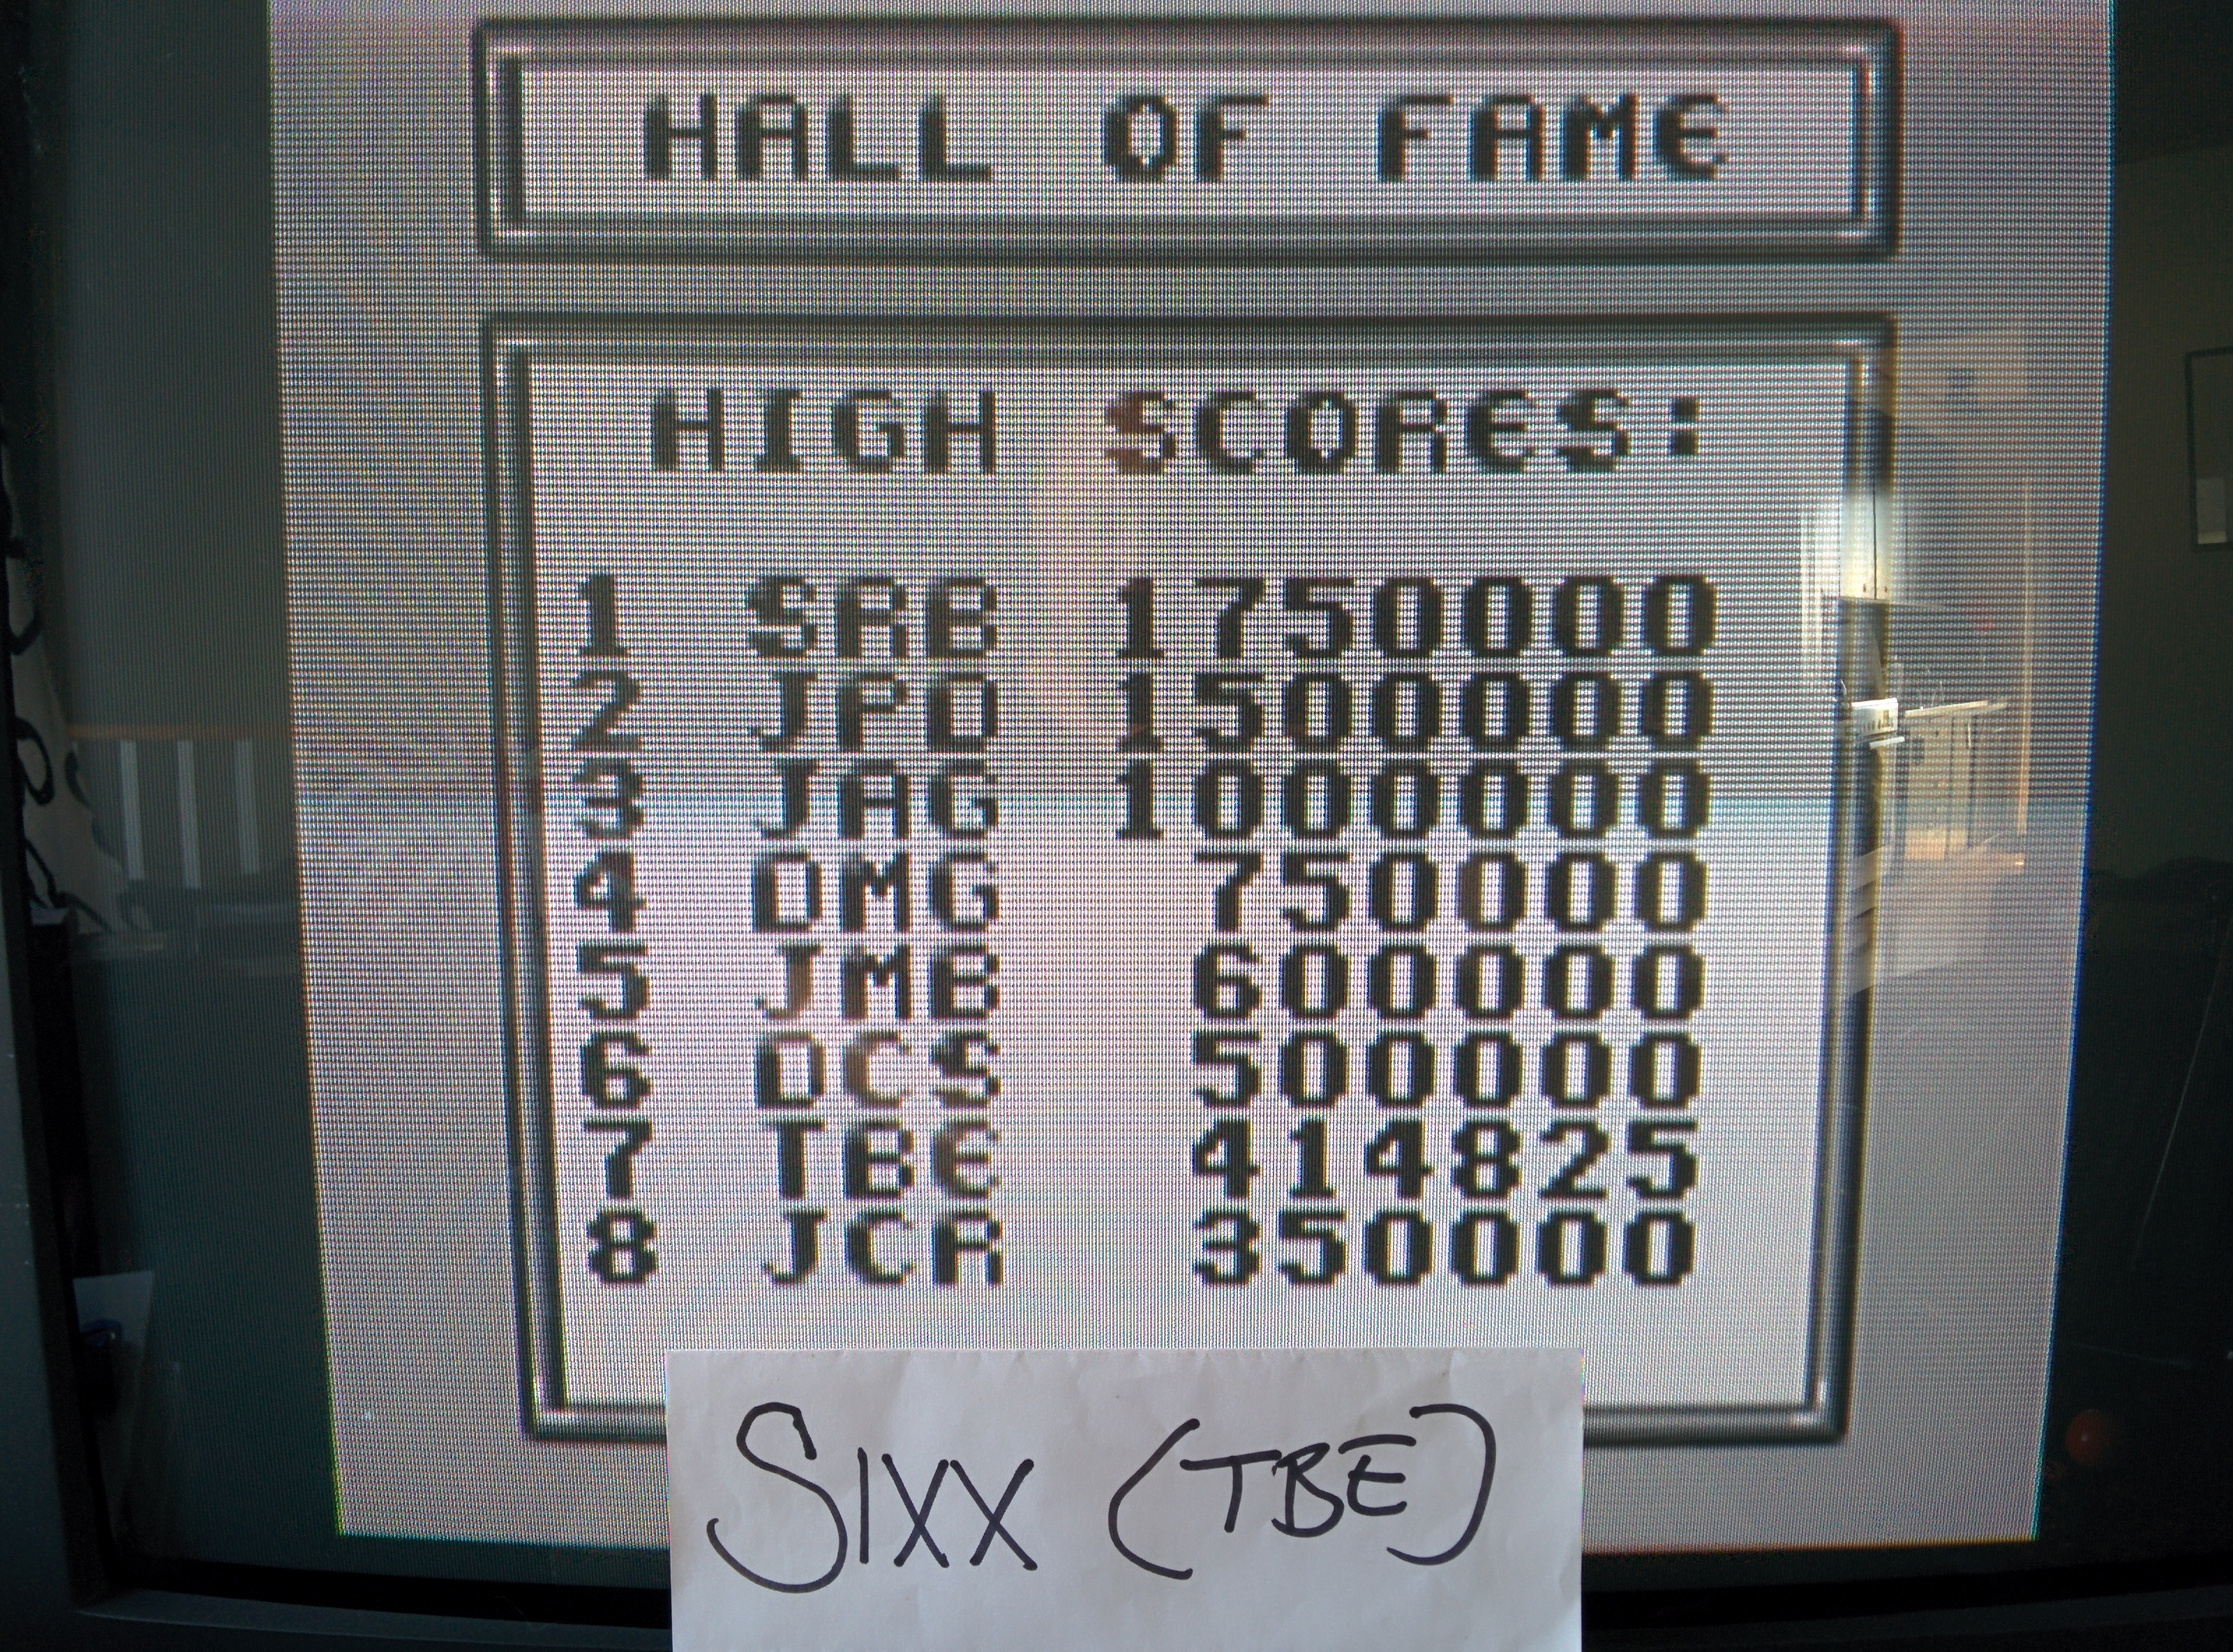 Sixx: Crystal Quest (Game Boy Emulated) 414,825 points on 2014-06-16 07:27:02